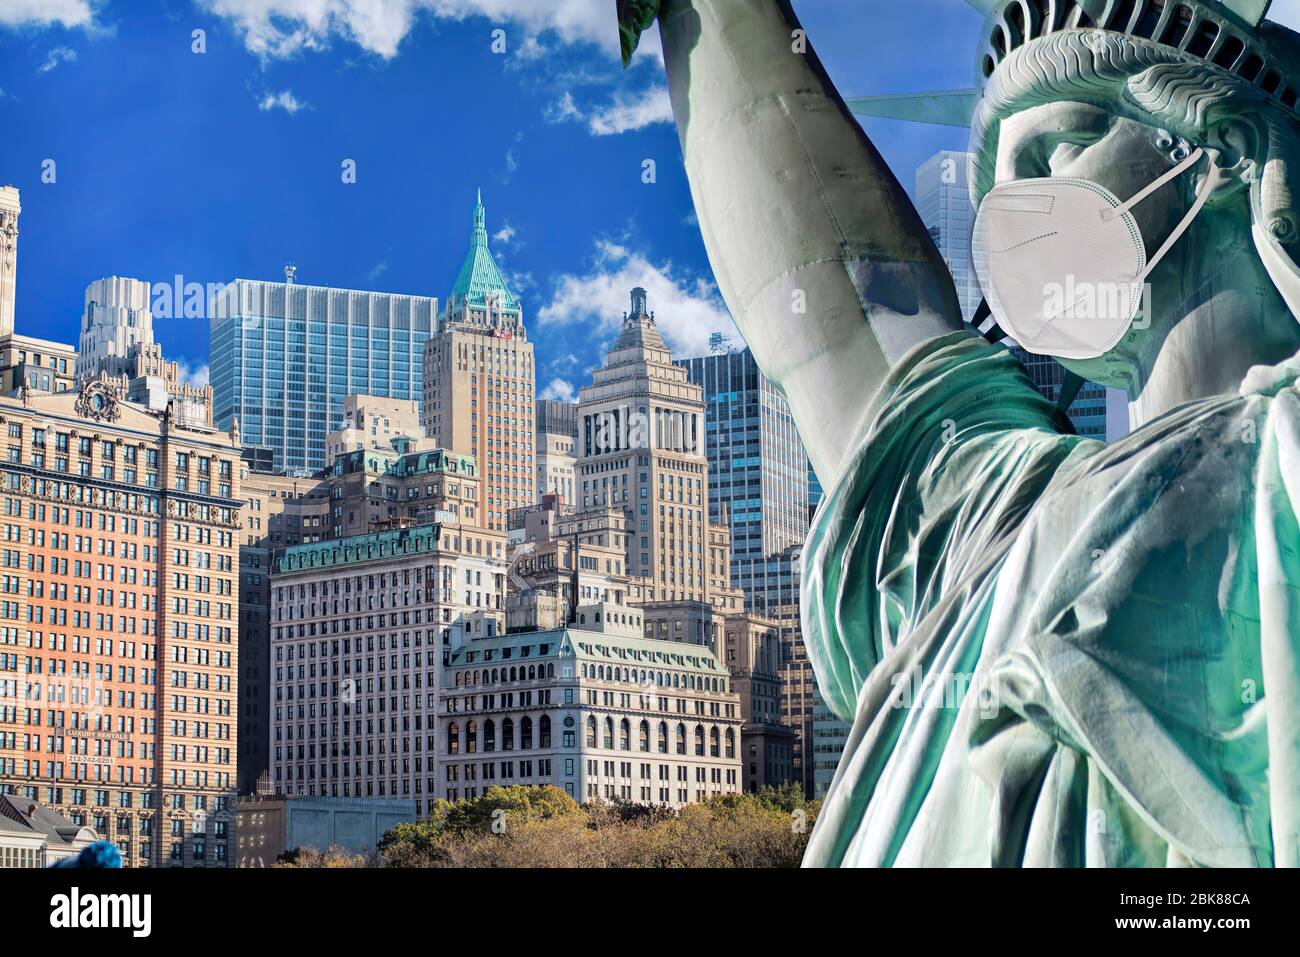 Statue of Liberty wearing face mask in NYC. Stock Photo